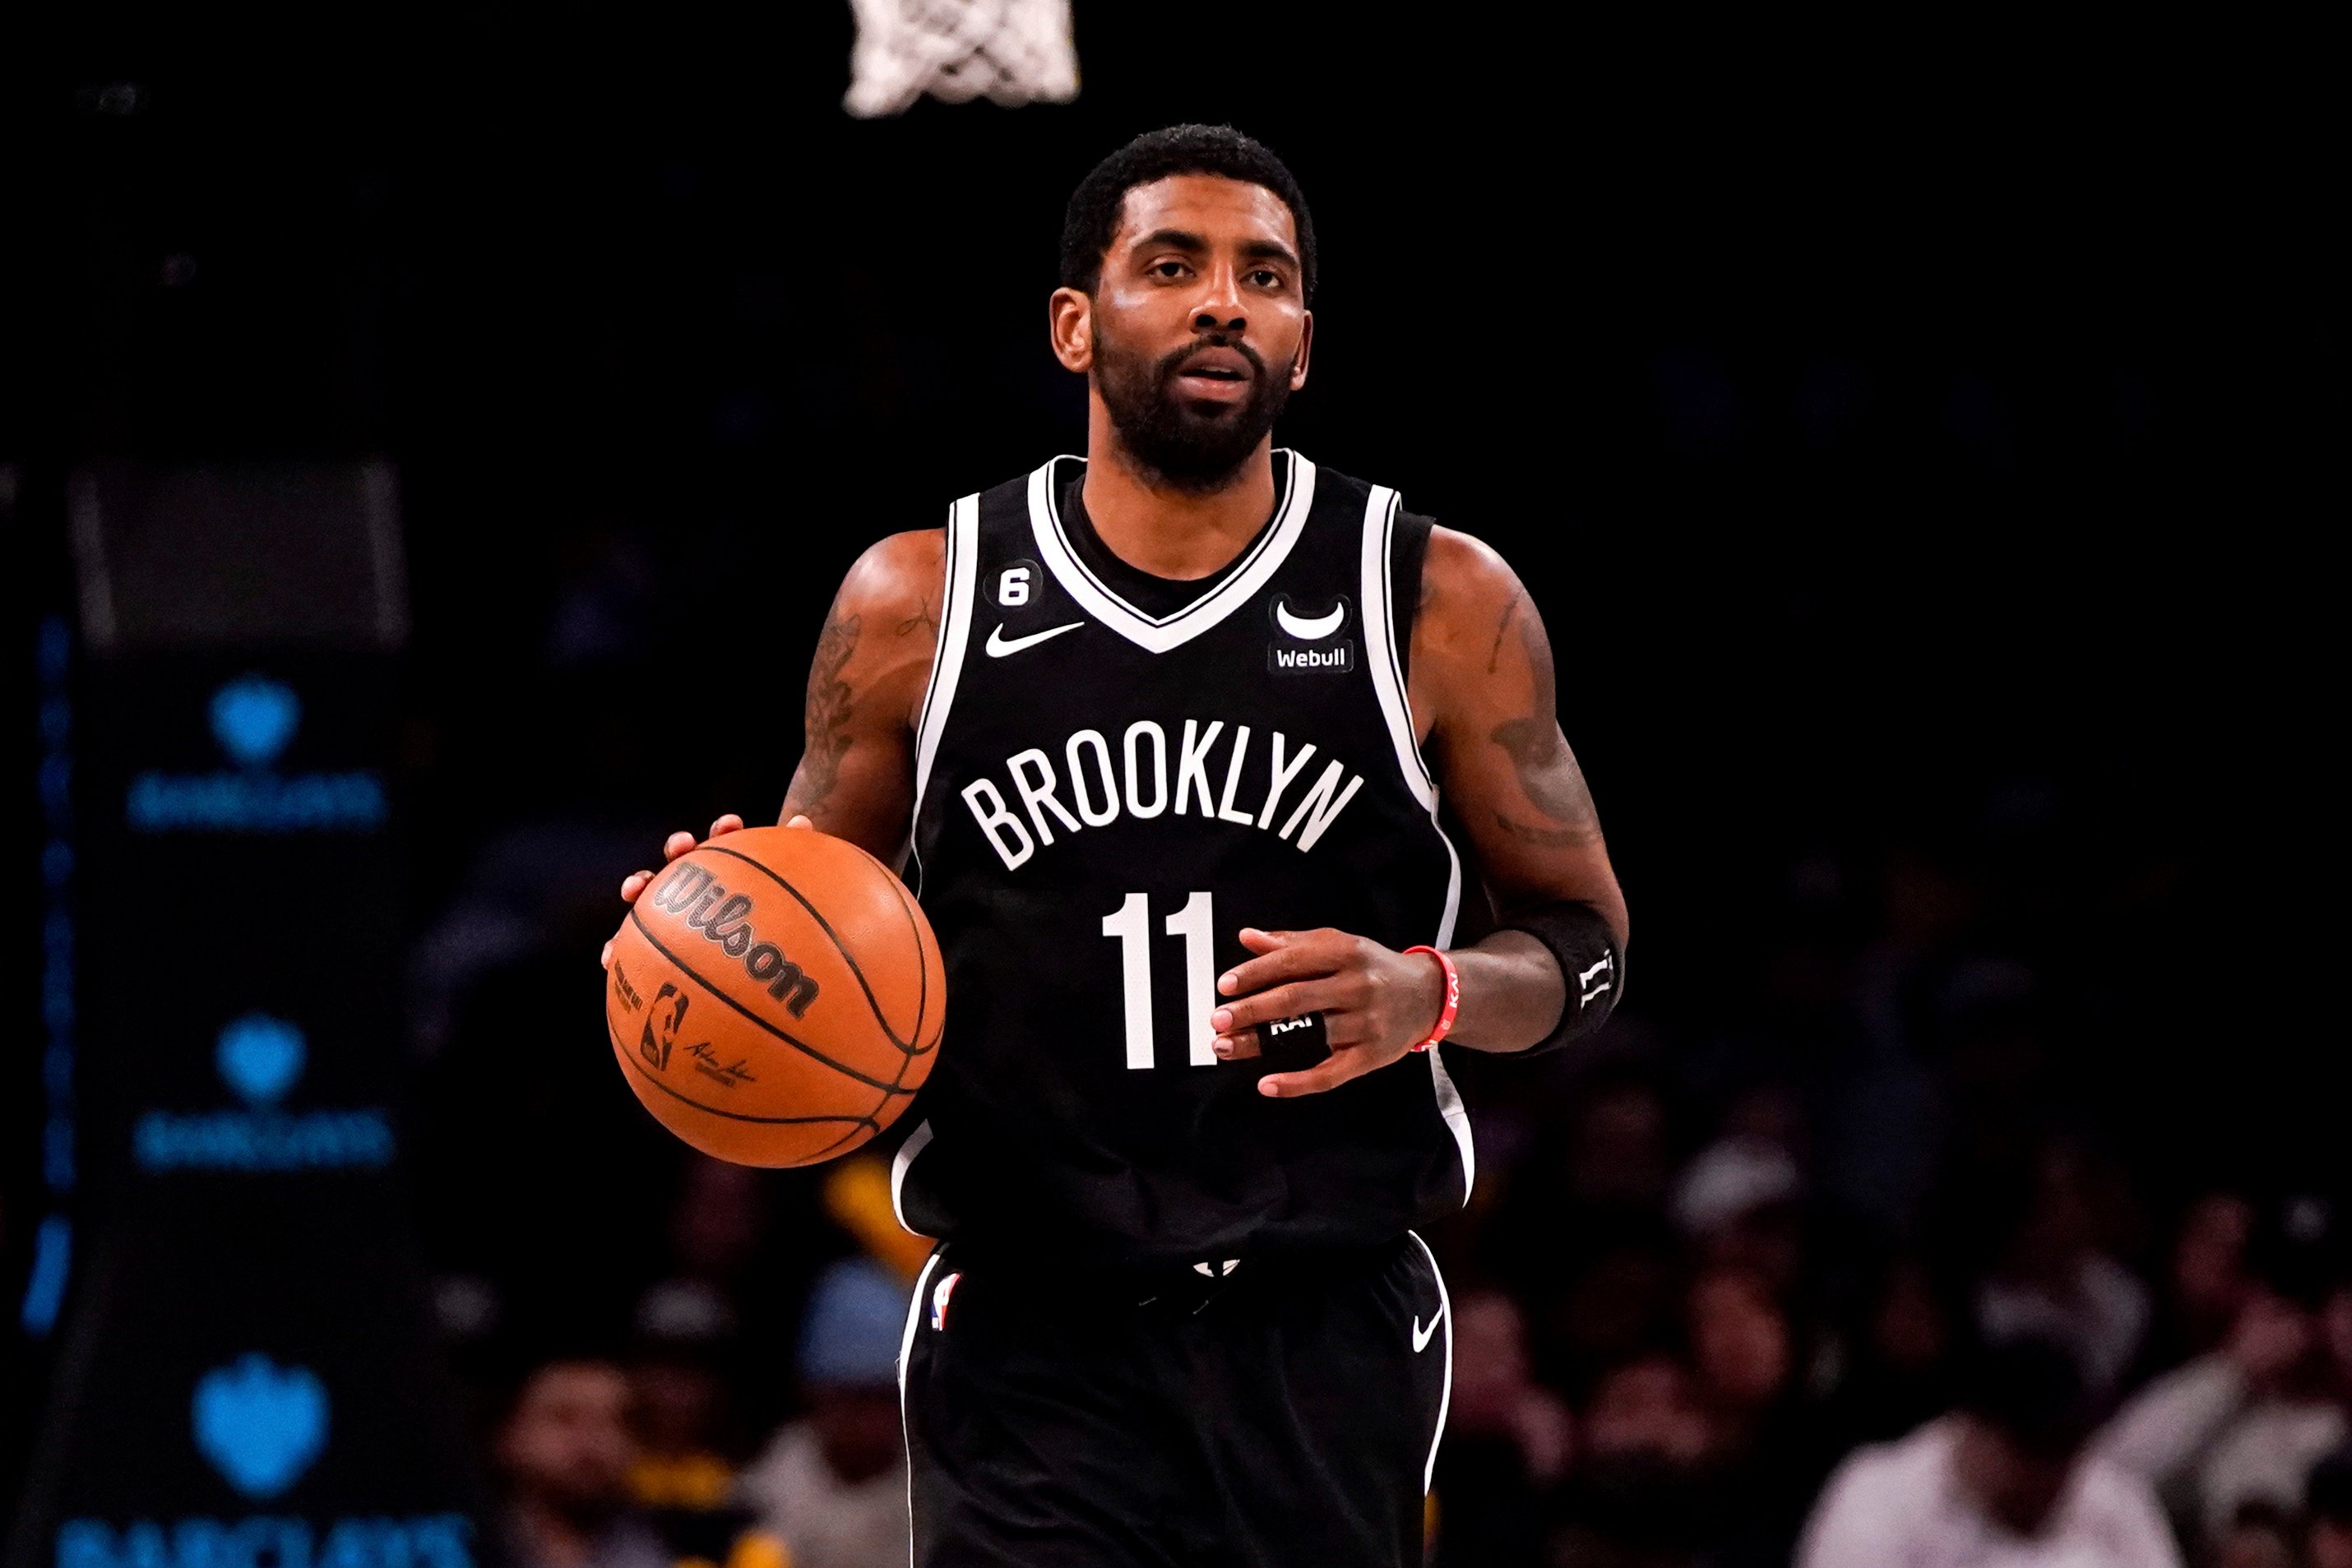 Brooklyn Nets guard Kyrie Irving in action in the NBA in November 2022 against the Orlando Magic. Photo: AP